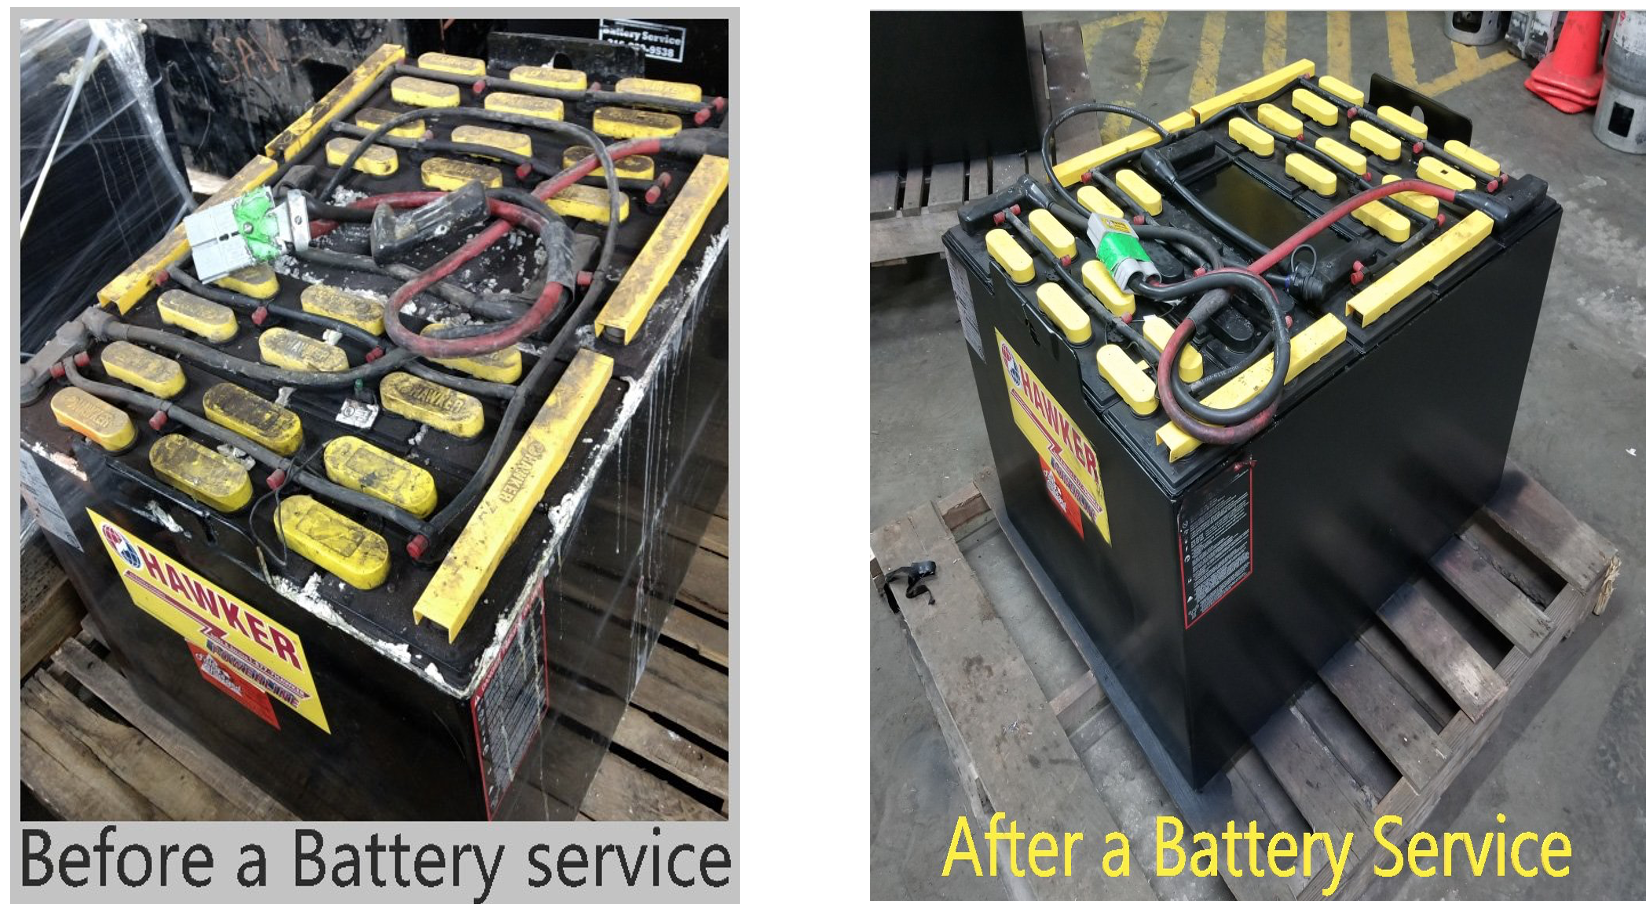 Before and after battery service